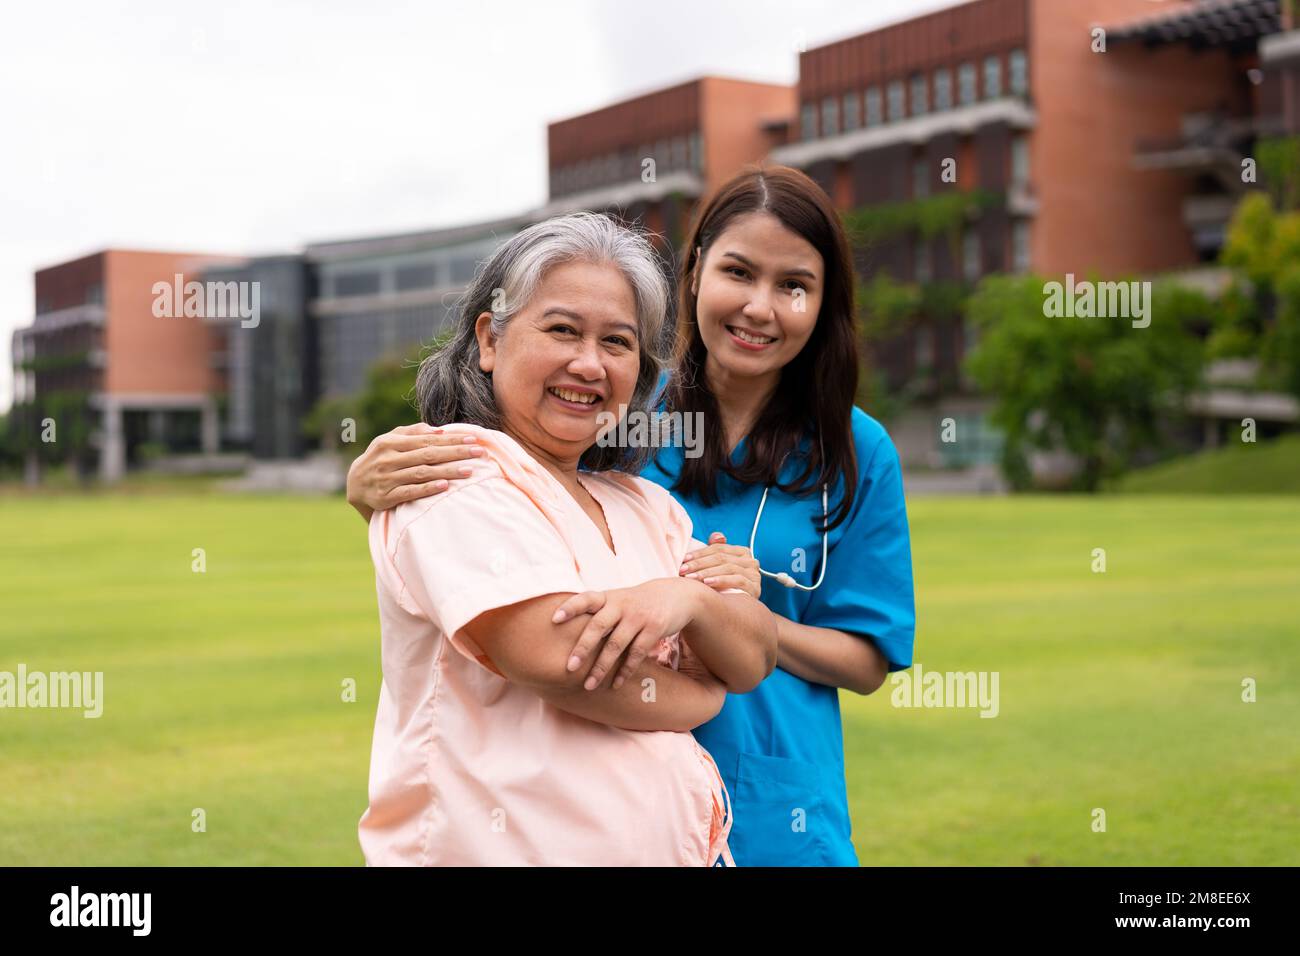 Asian careful caregiver or nurse hold the patient hand and encourage the patient in a garden. Concept of happy retirement with care from a caregiver a Stock Photo